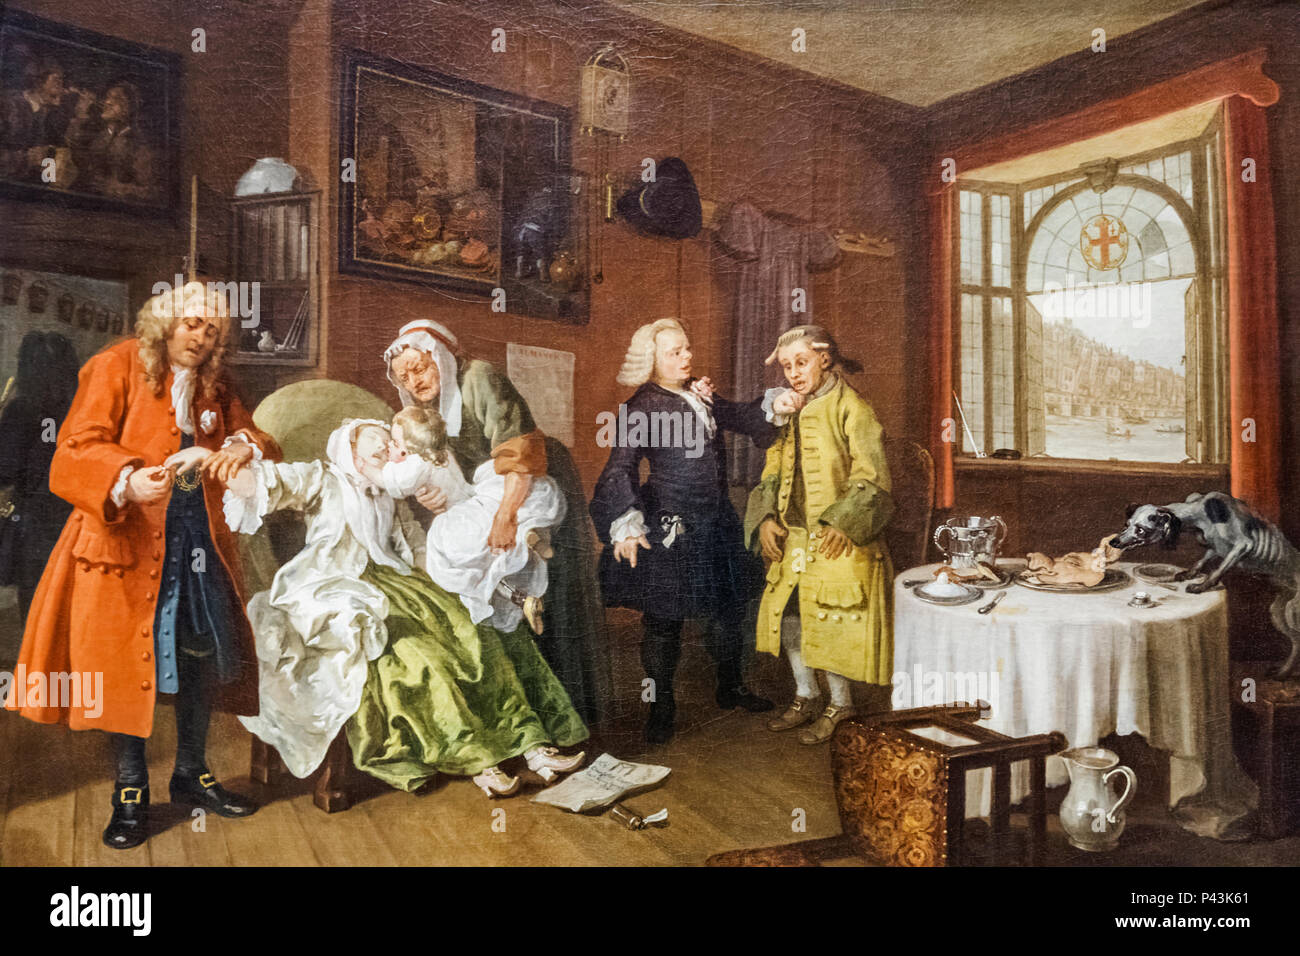 Painting from The Marriage A-la-Mode Series titled 'The Lady's Death' by William Hogarth dated 1743 Stock Photo